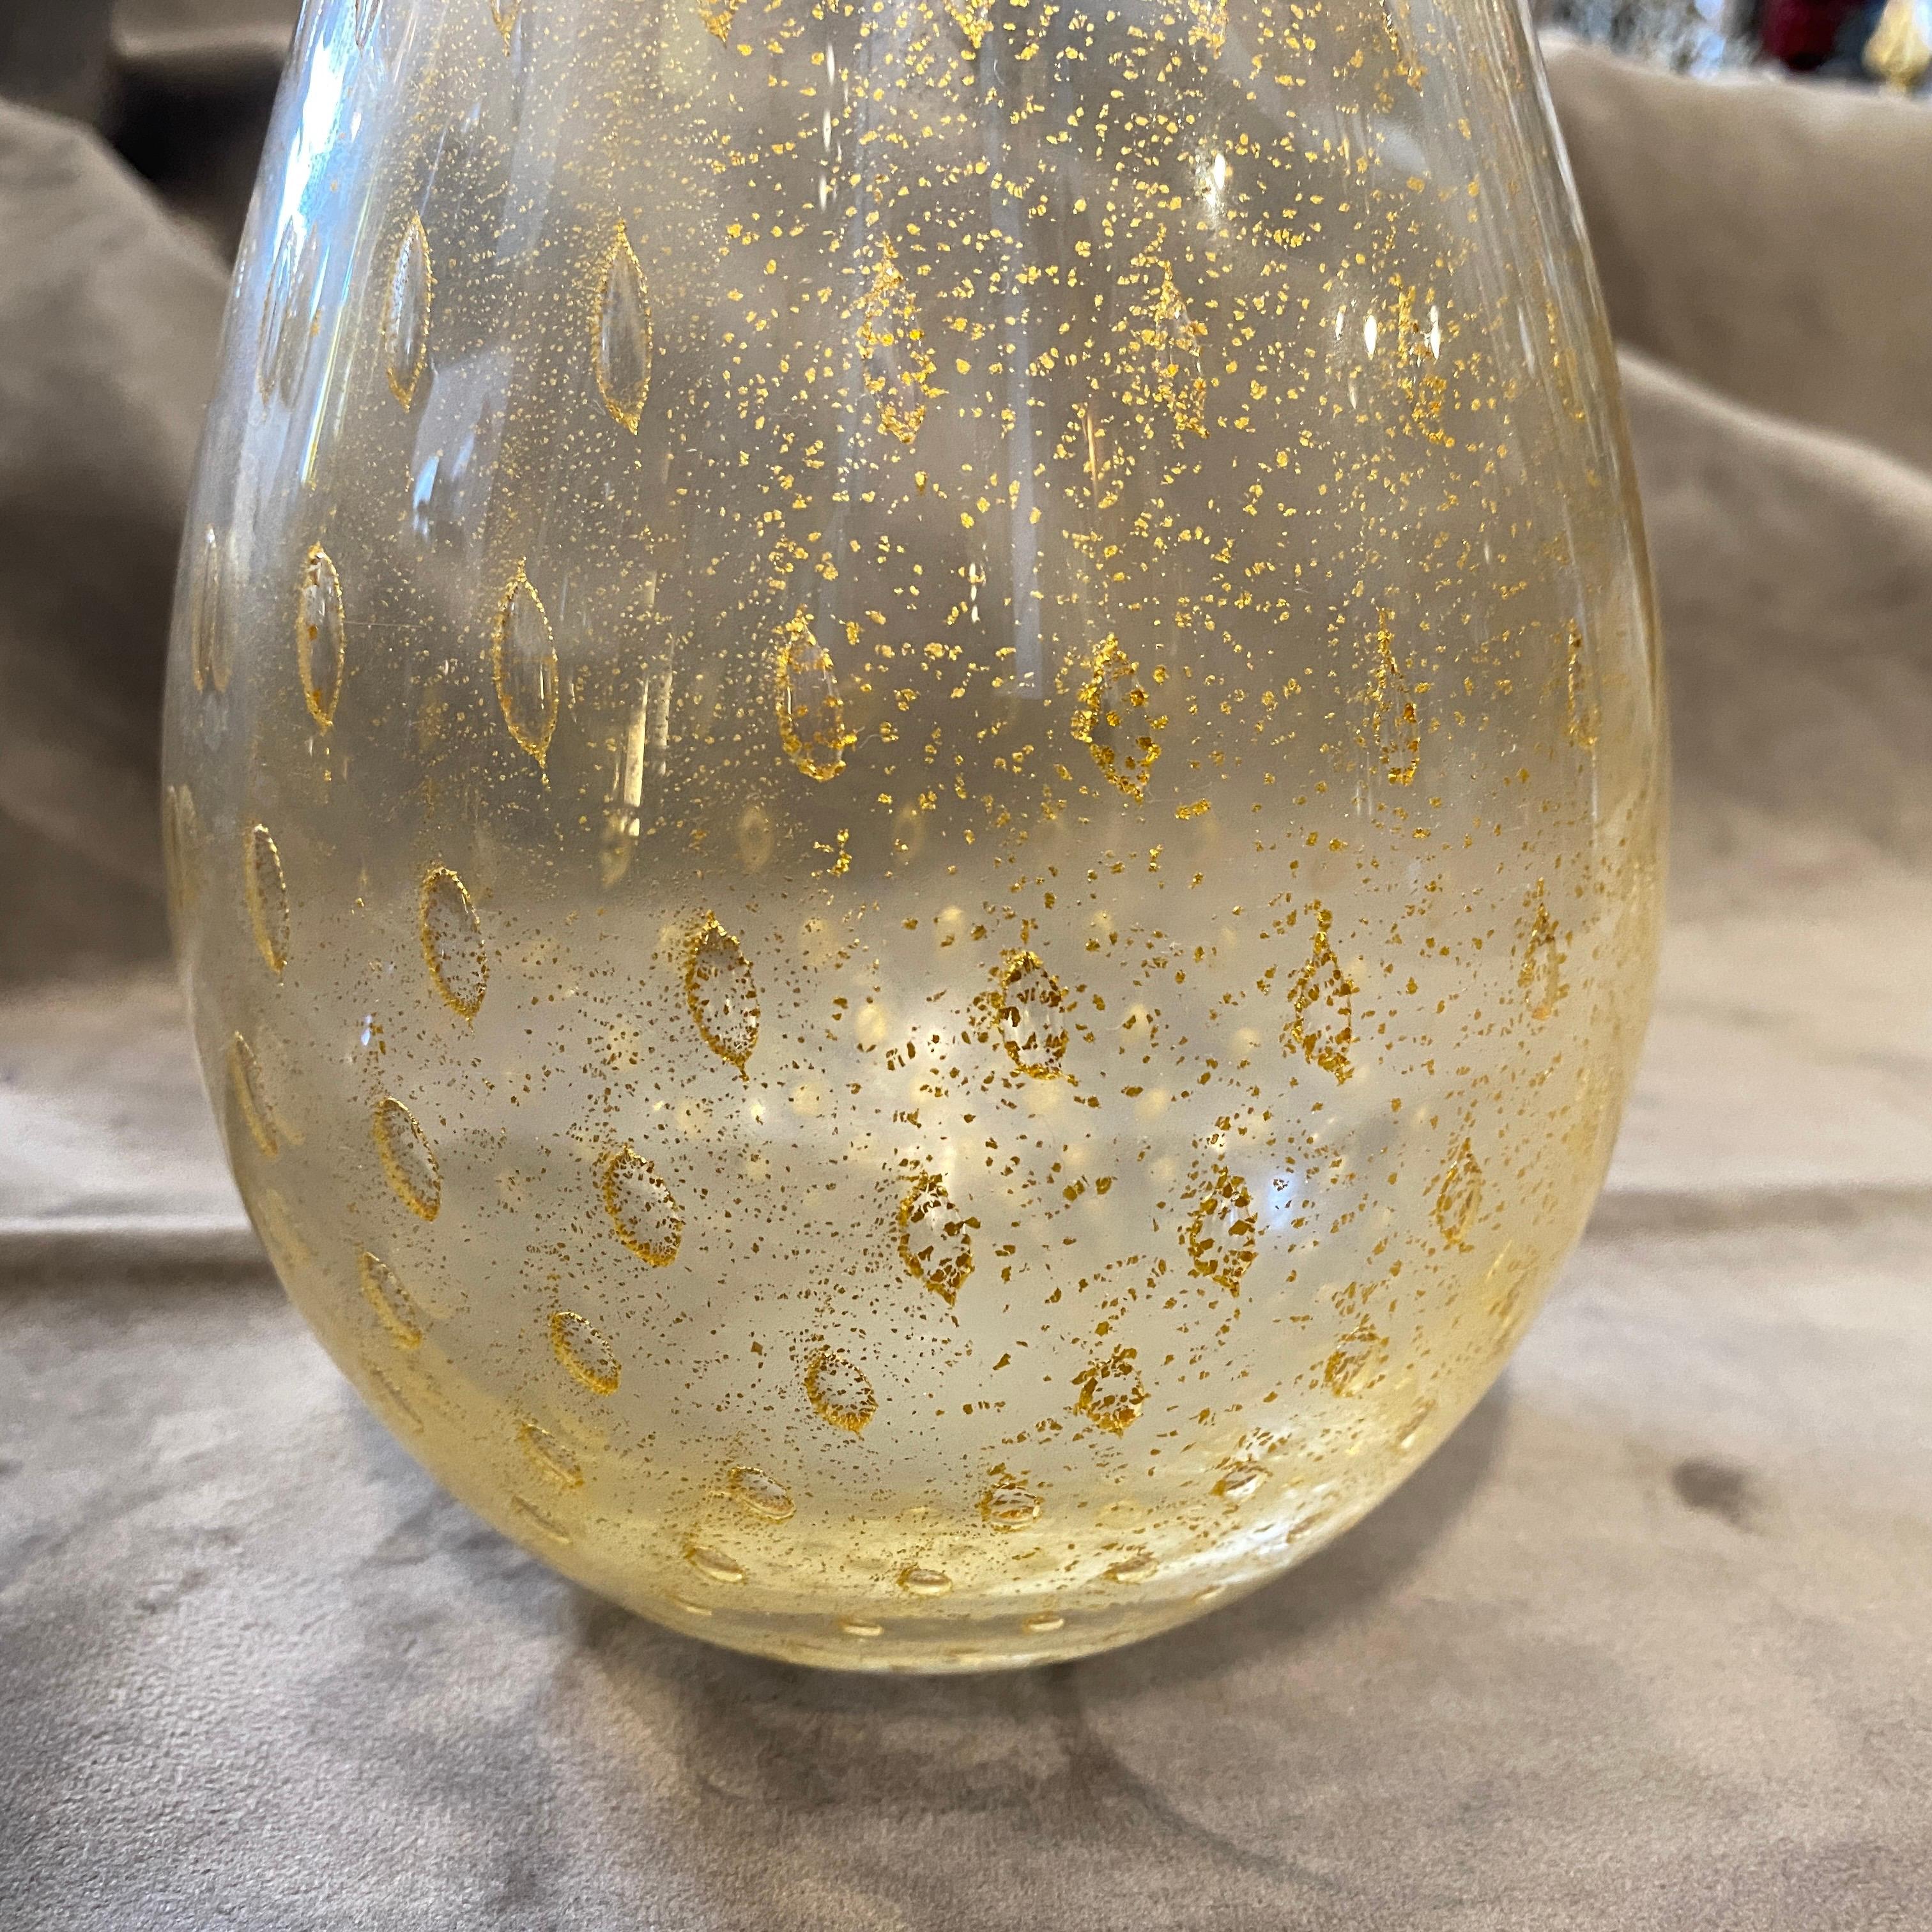 A transparent and gold bullicante murano glass vase designed and manufactured in Venice in the Sixties, pure gold inside the glass gives it a superb look. Totally hand-crafted, it's in perfect conditions. This vase it's a beautiful and highly